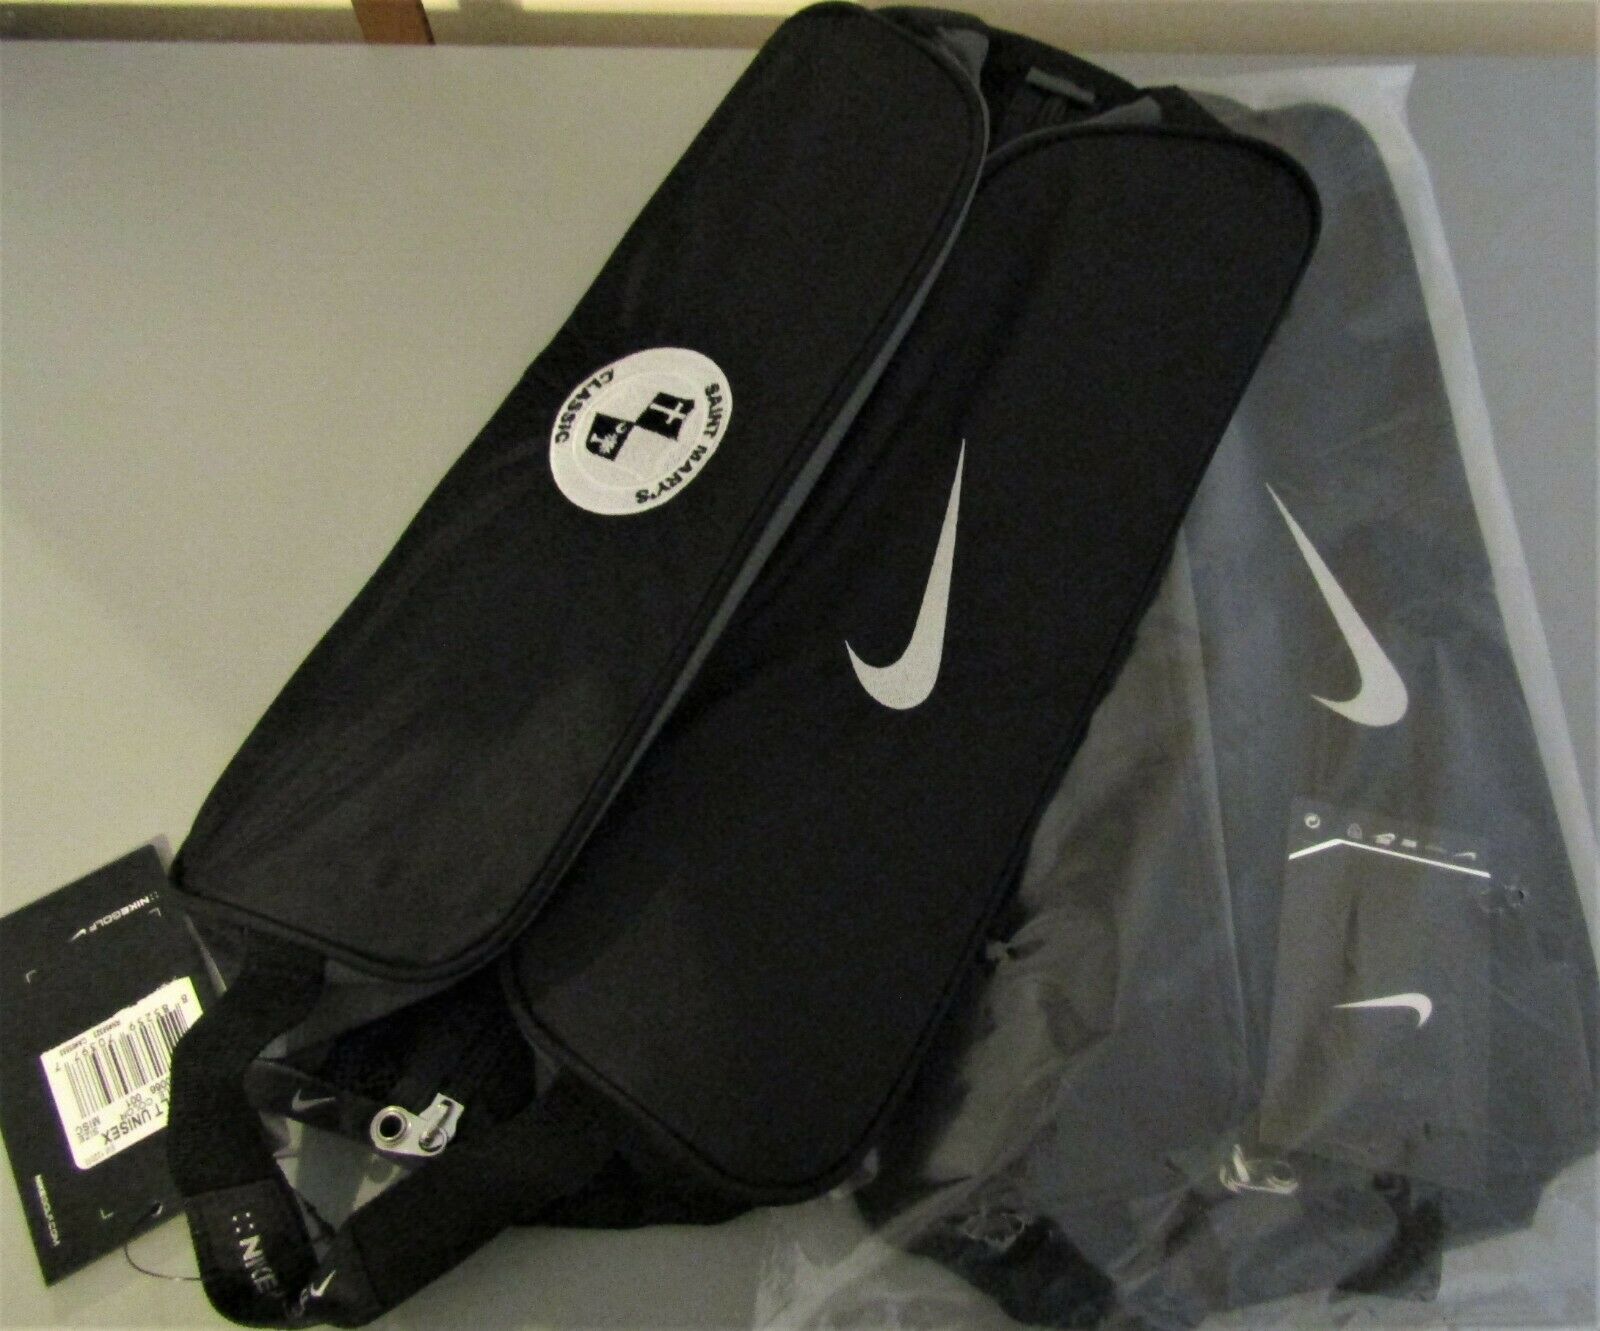 (2) Vintage Nike Golf Embroidered Saint Mary's Golf Classic Shoe Bag New